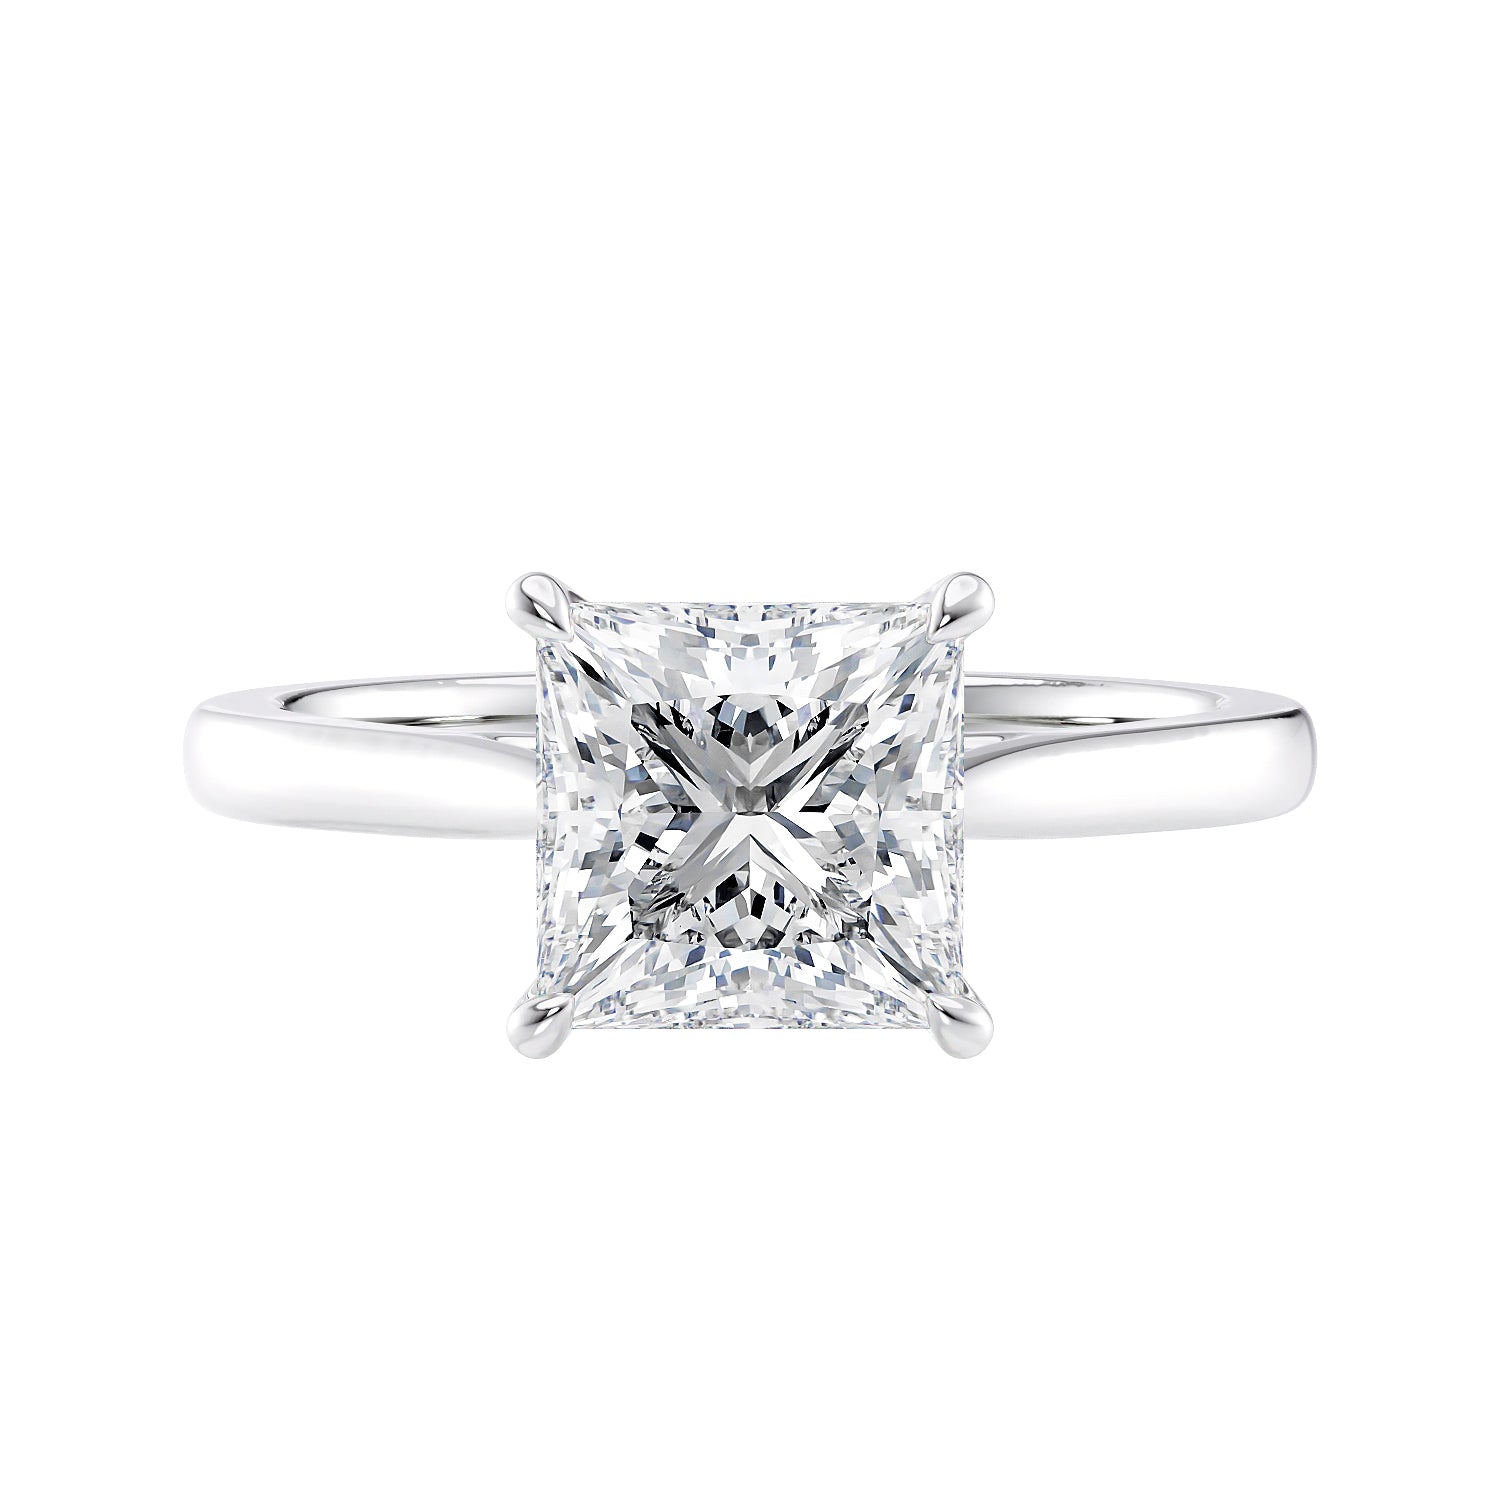 Classic princess cut diamond solitaire engagement ring white gold front view.